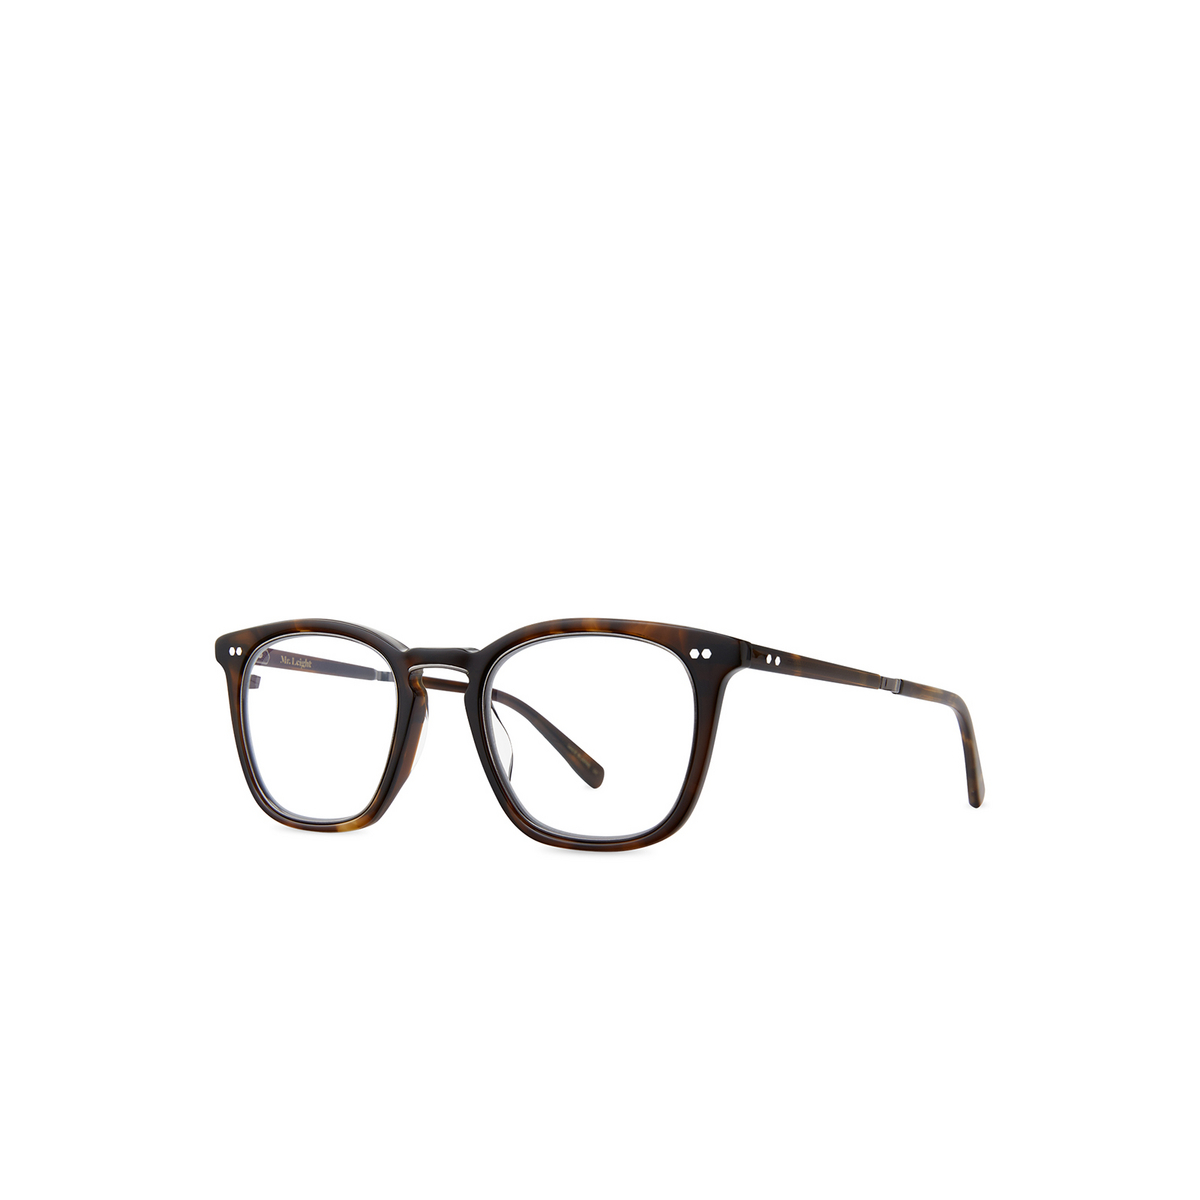 Mr. Leight GETTY II C Eyeglasses CACT-PW Cacao Tortoise-Pewter - 2/3